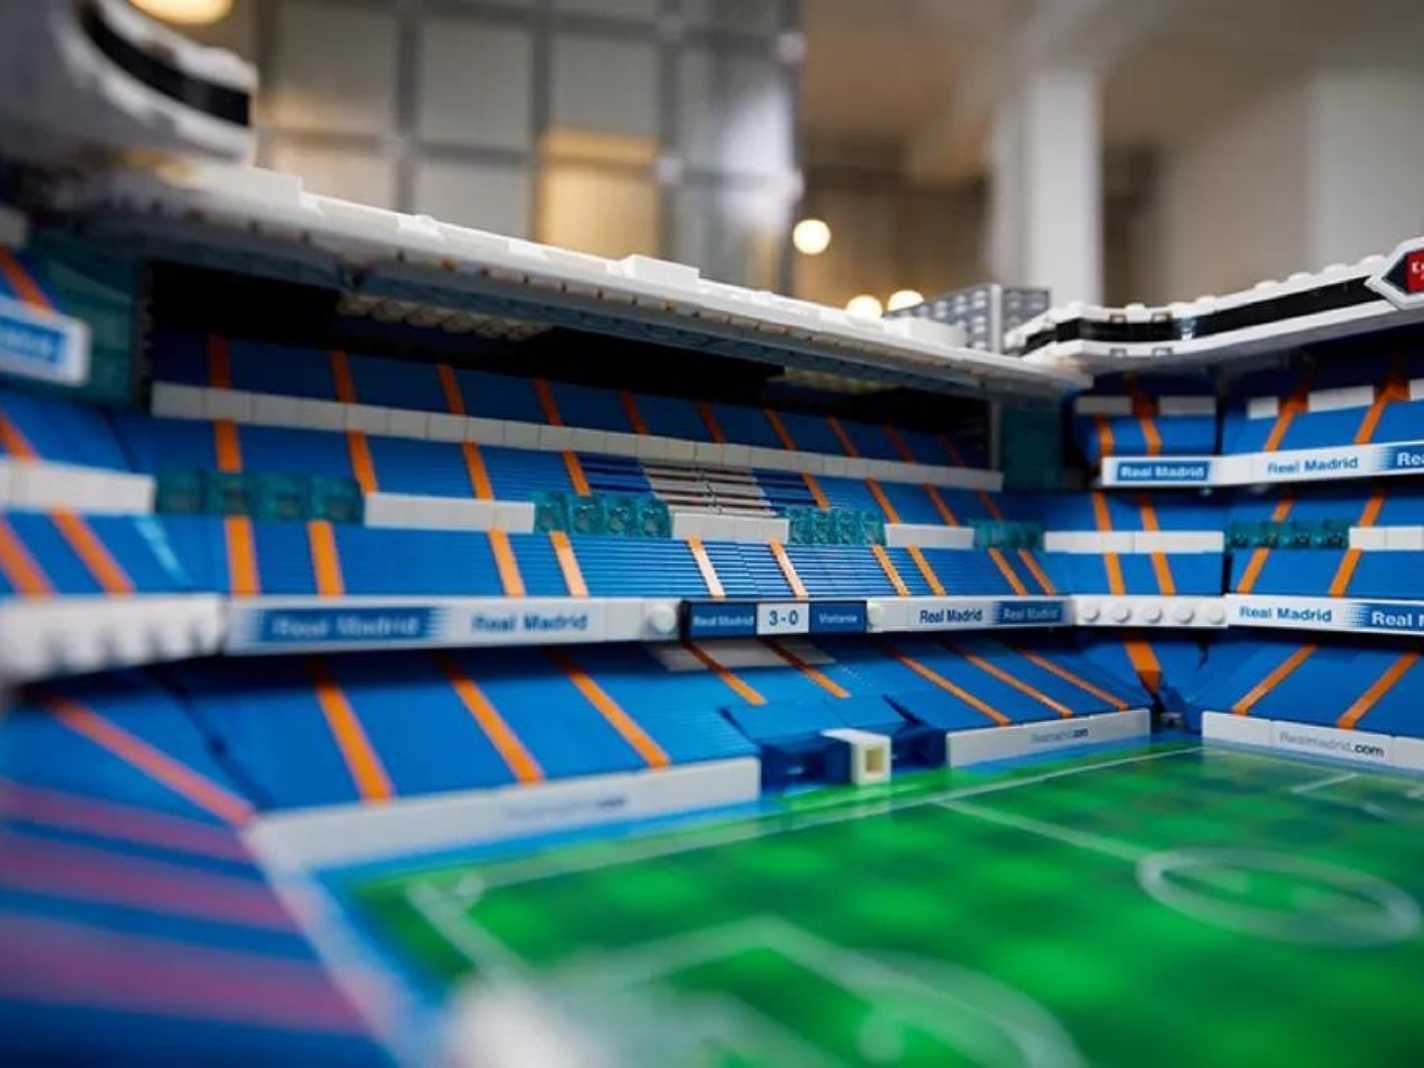 3 cool features of new Santiago Bernabeu set from toymakers Lego